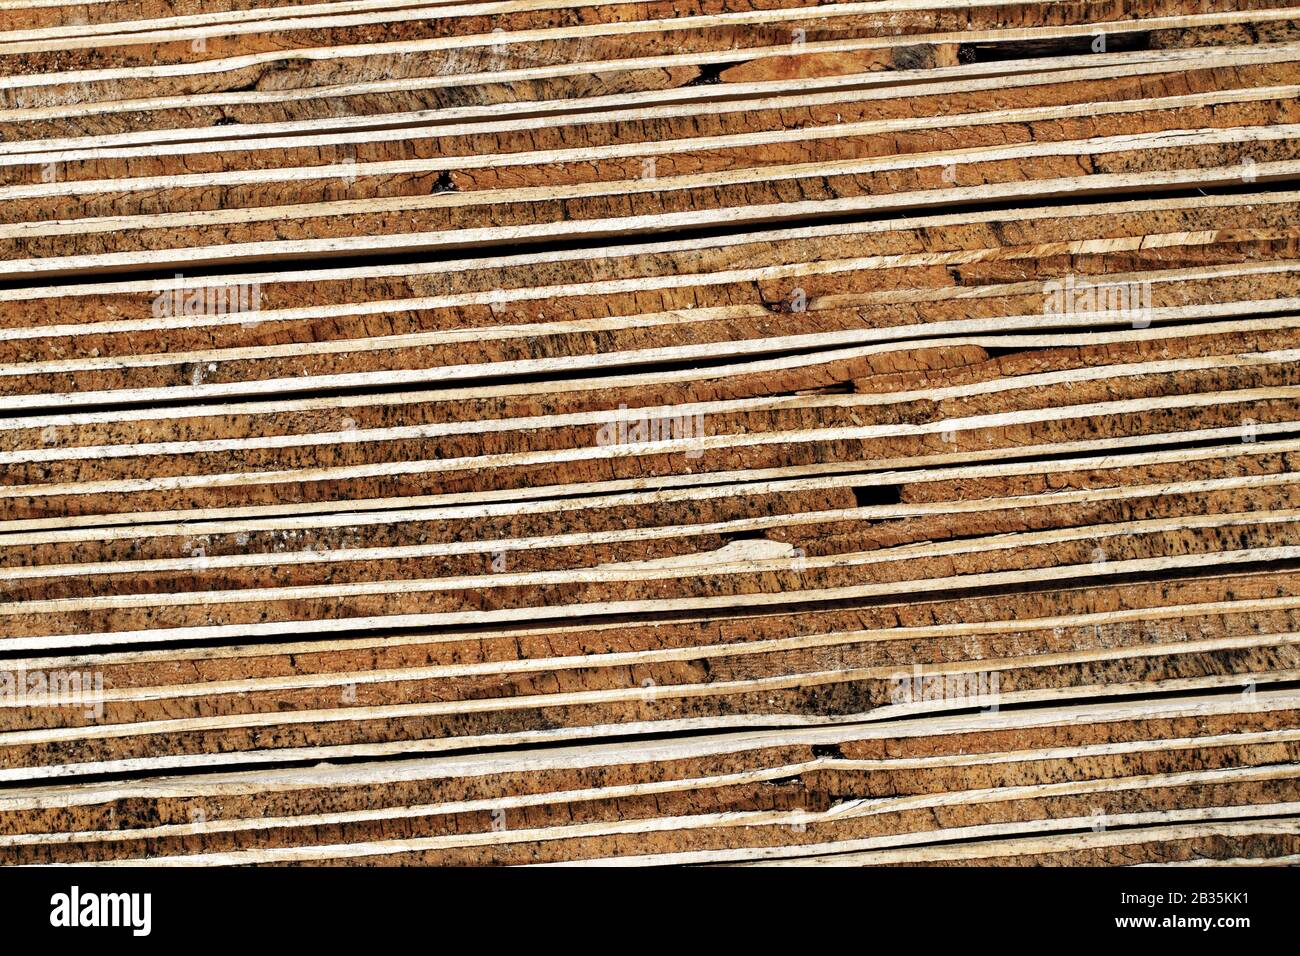 Plywood Layer: detailed timber background showing a detailed seven-ply plywood stack's cross section closeup view Stock Photo